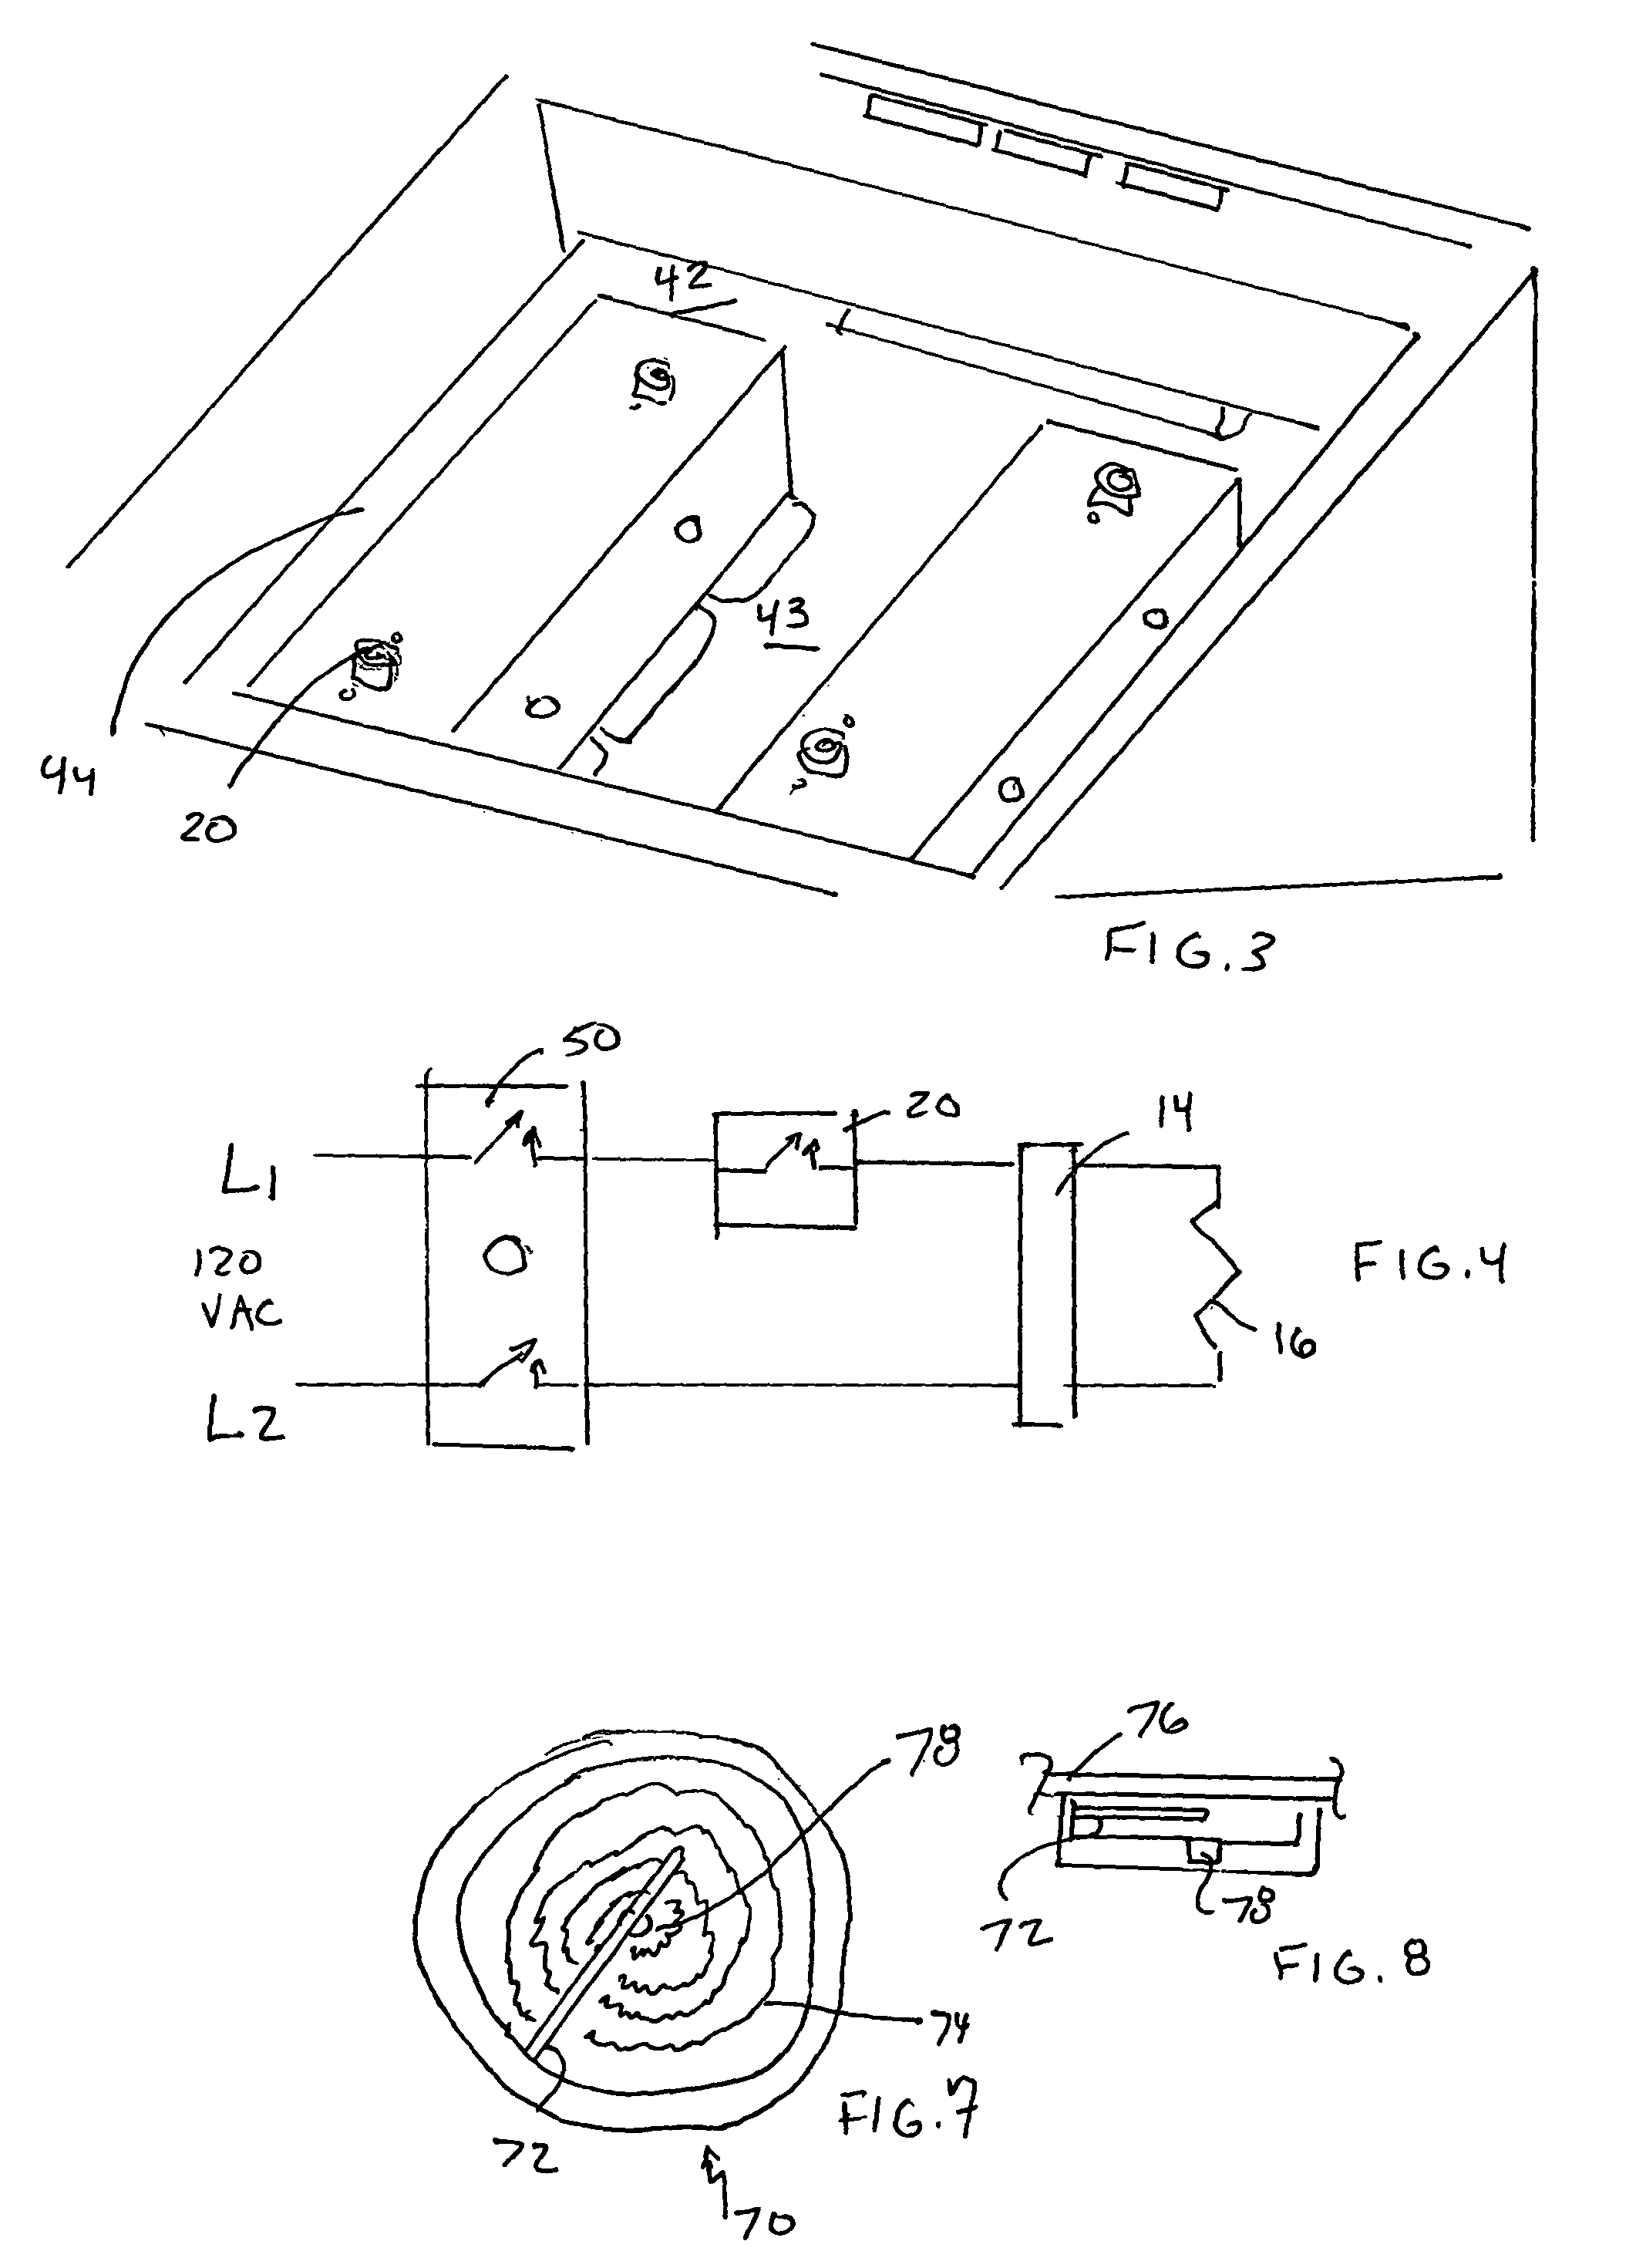 Method and apparatus for controlling operation of range top heating elements for cooking